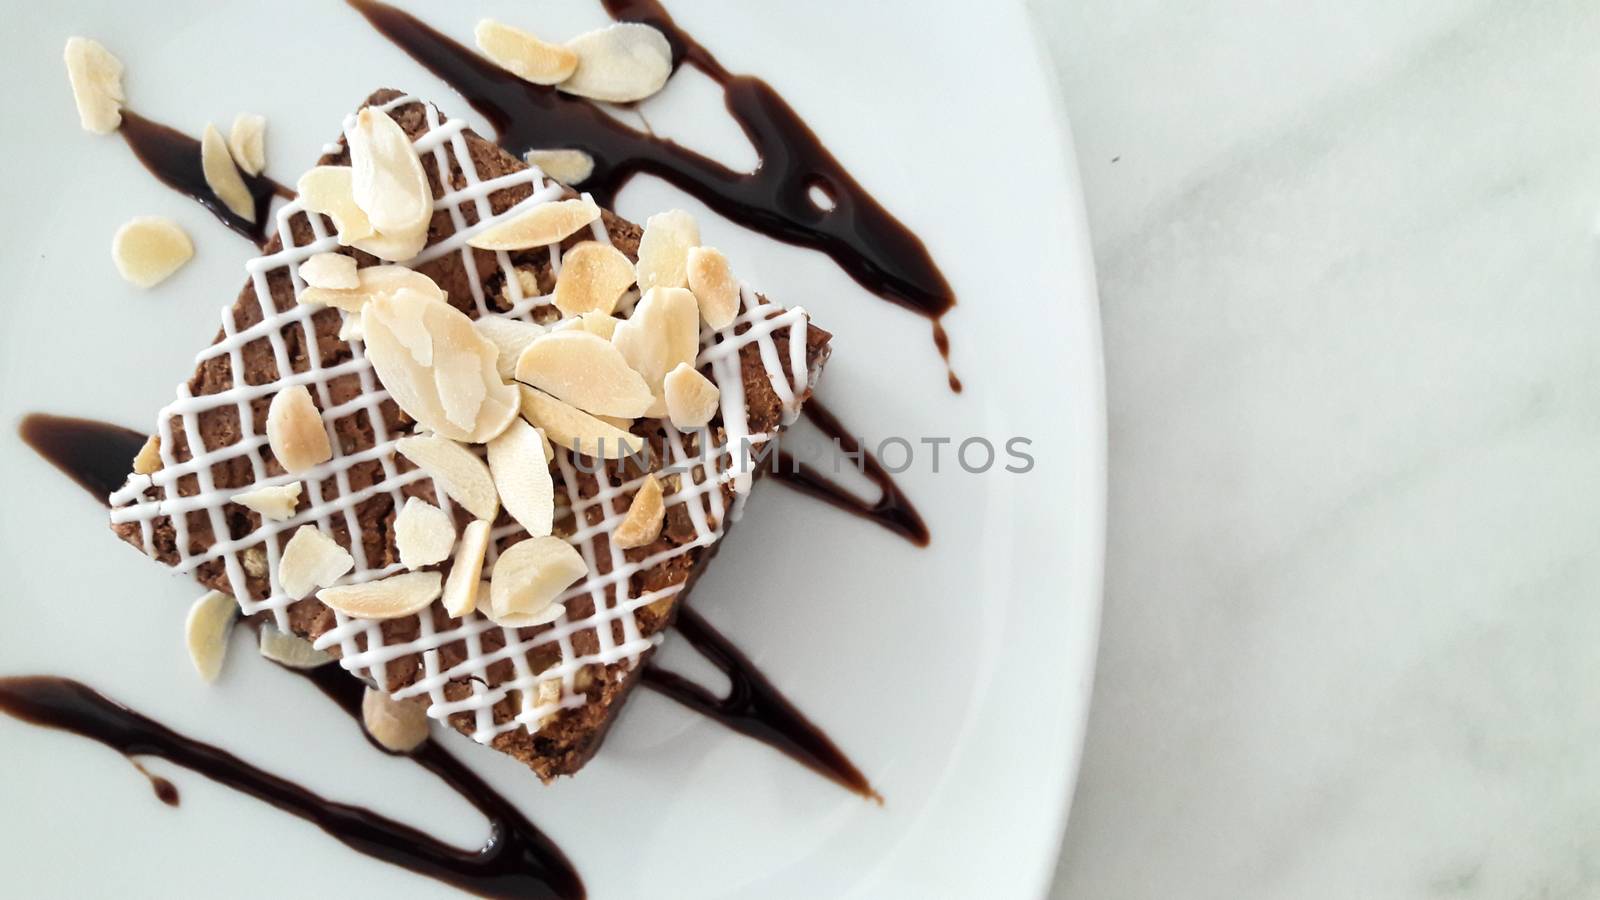 Top view of chocolate brownie with sliced almond on white plate  by Hengpattanapong